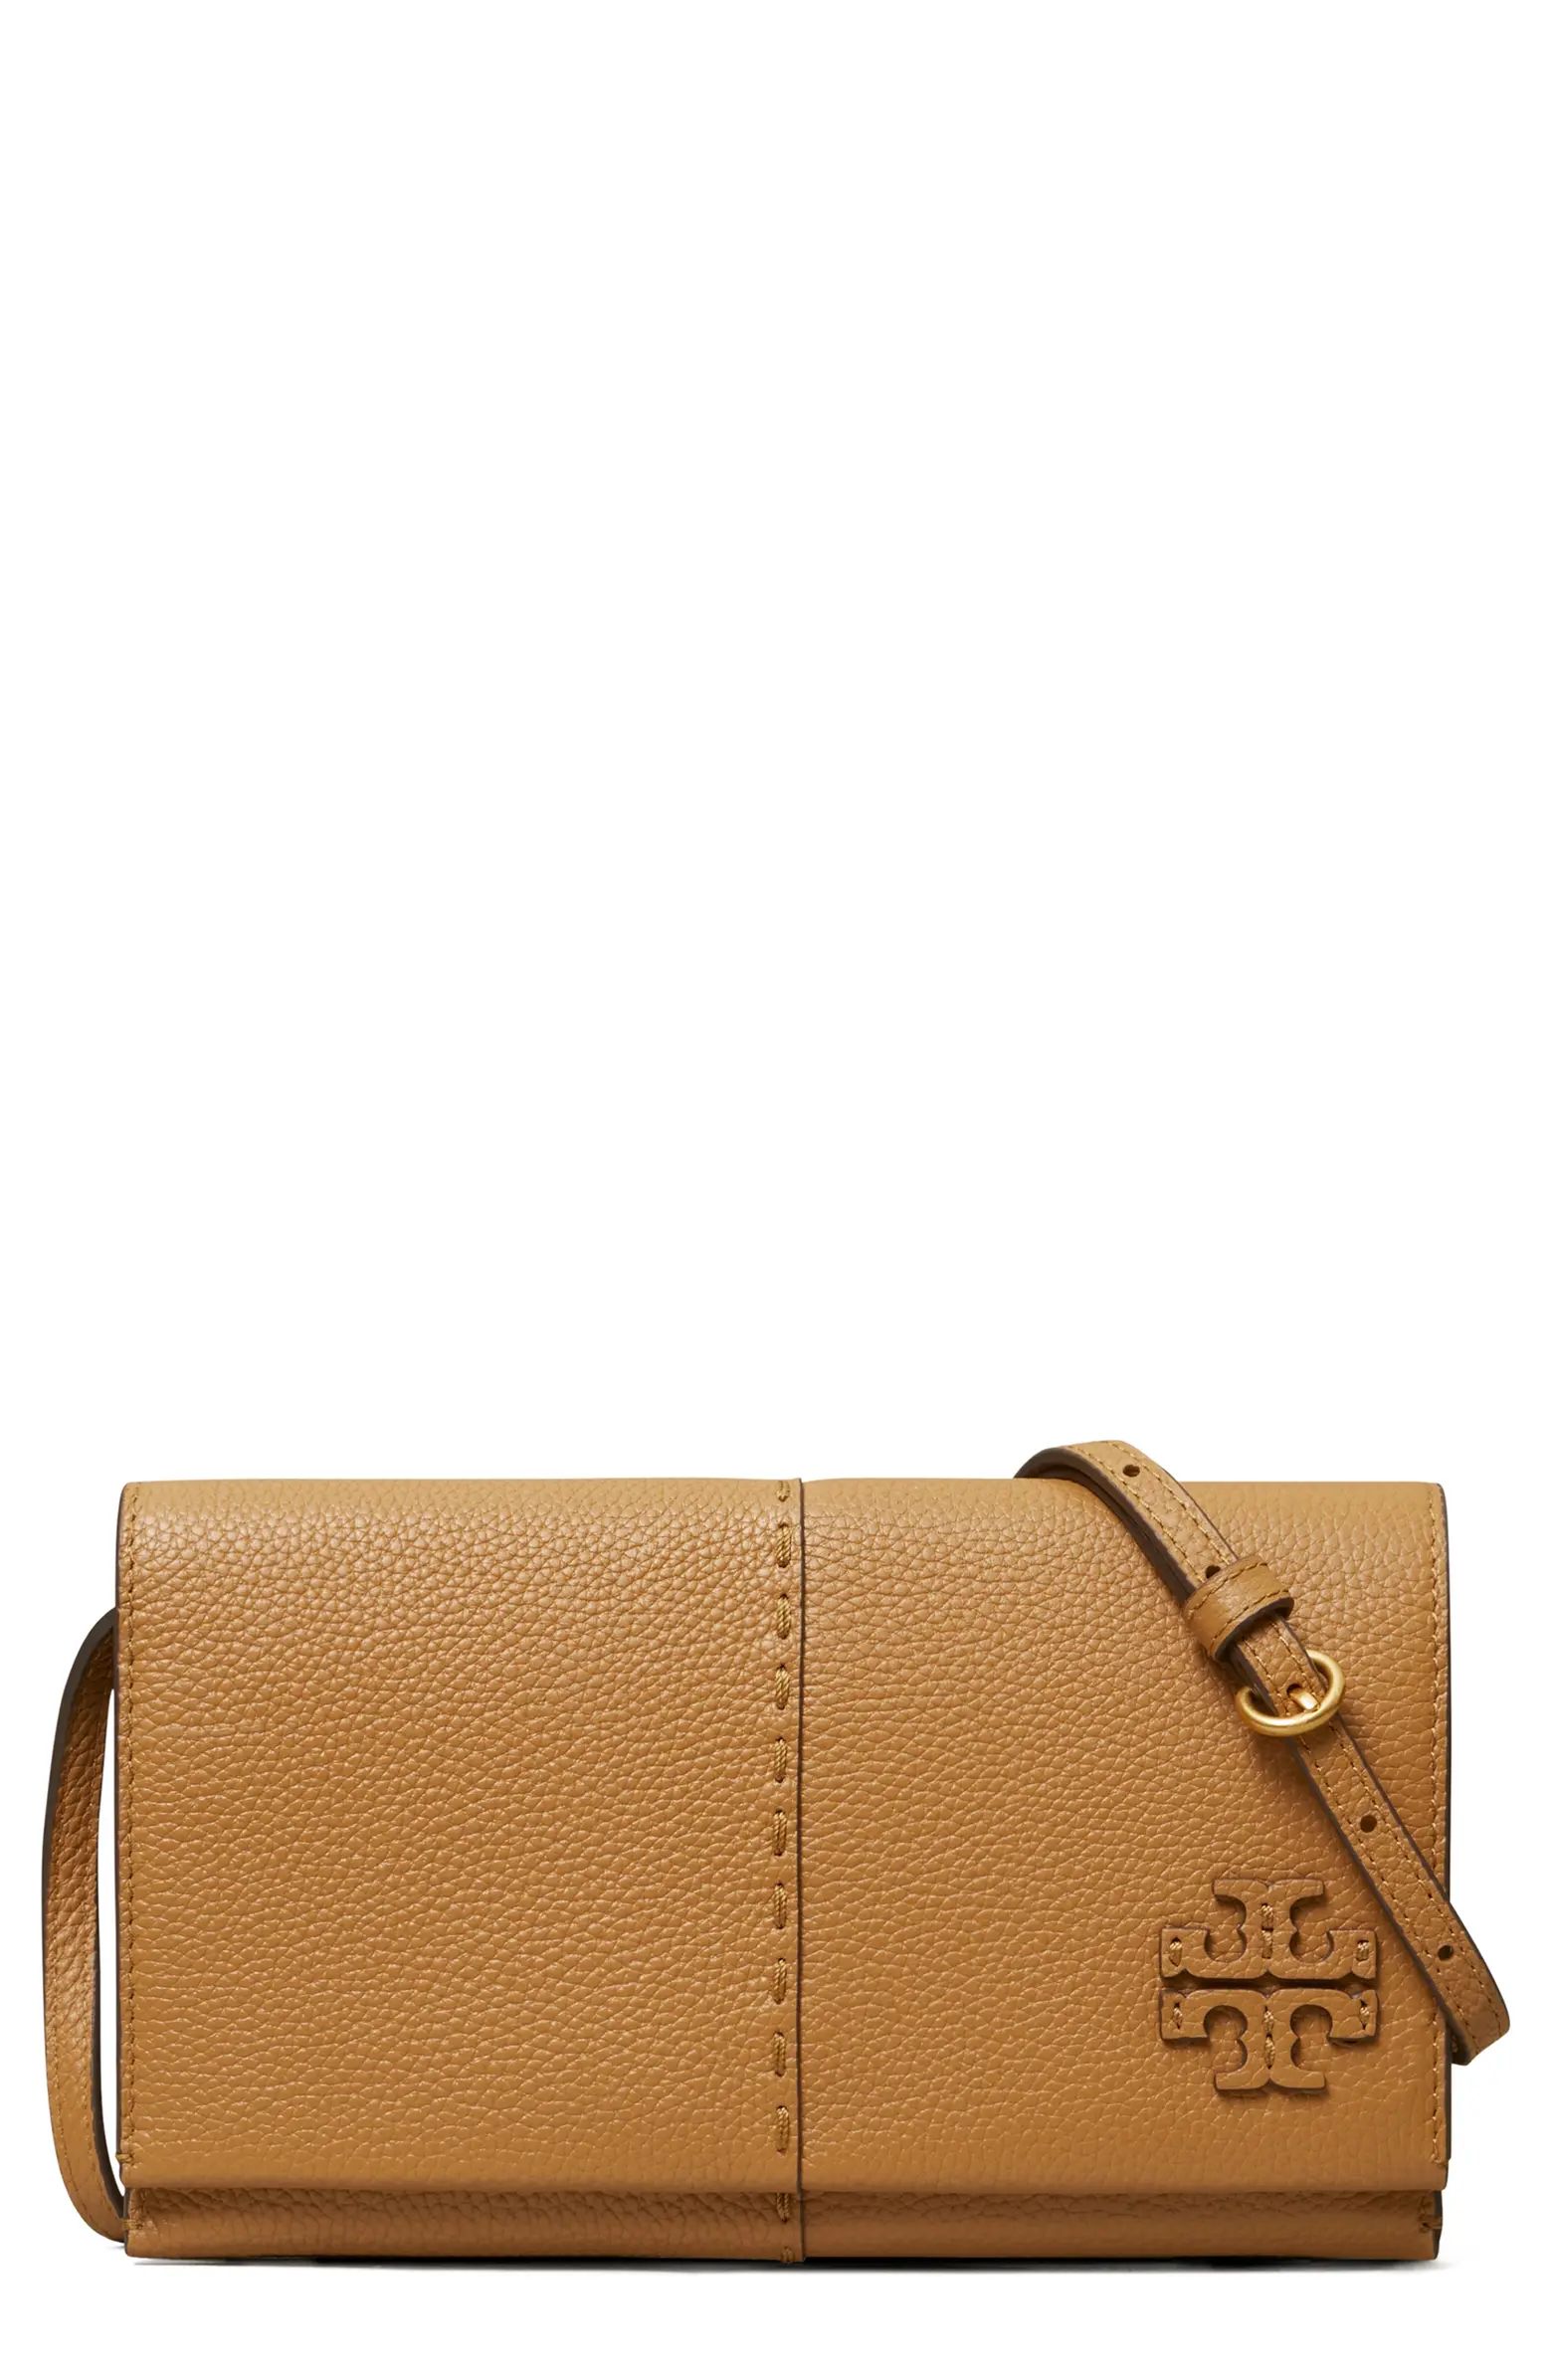 Tory Burch McGraw Leather Wallet Crossbody | Nordstrom | Nordstrom